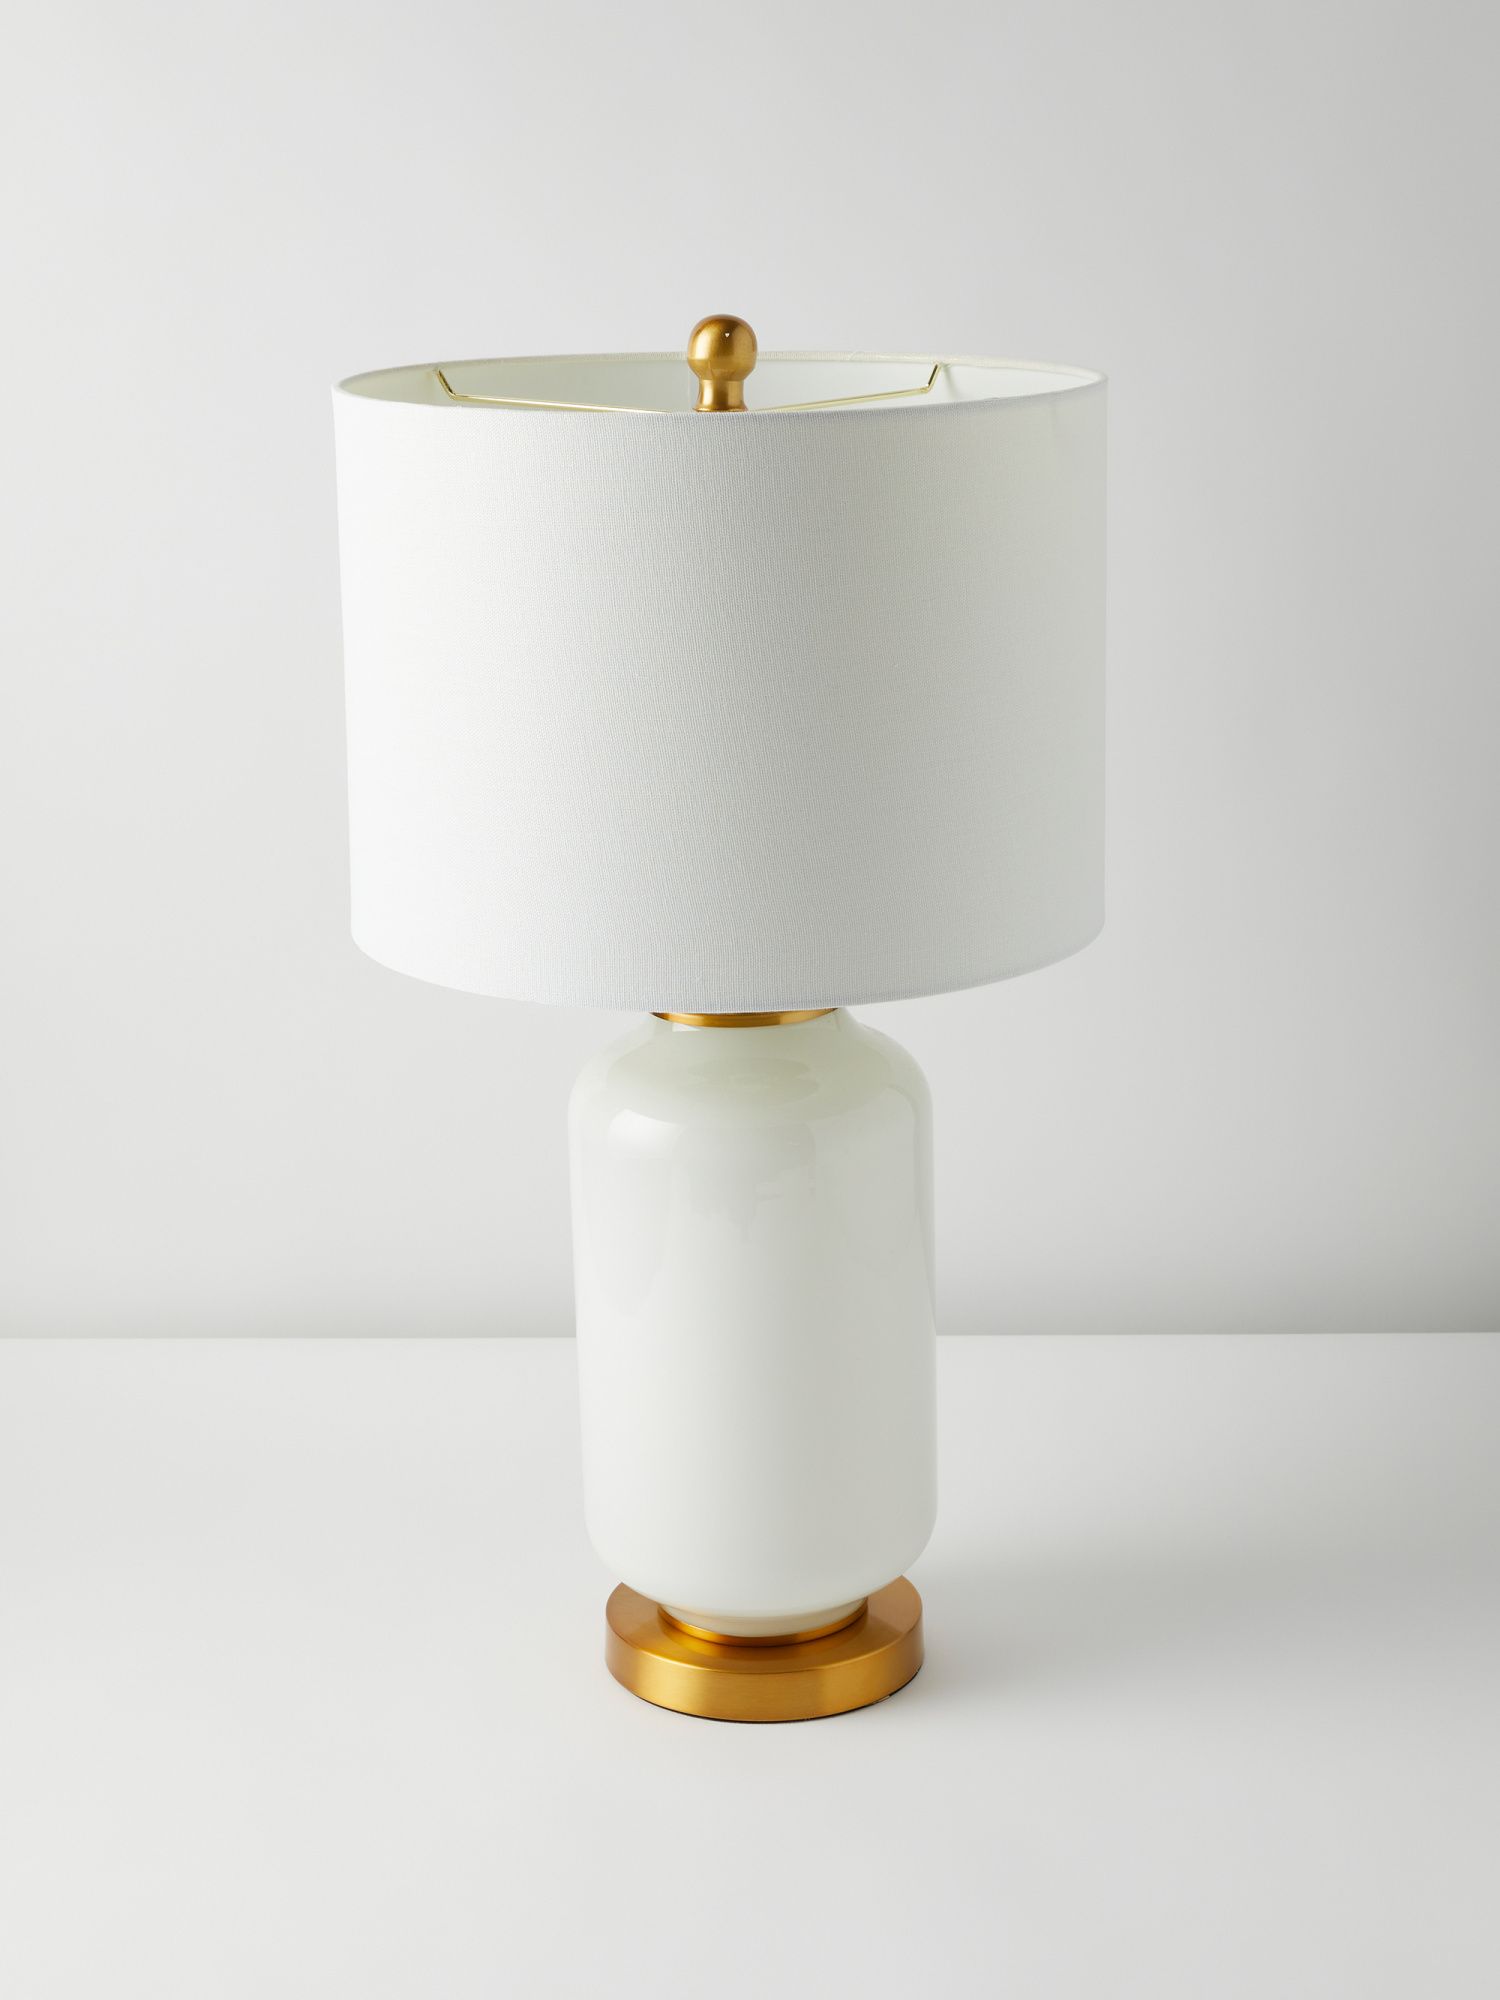 26in Amaia Glass Table Lamp | Table Lamps | HomeGoods | HomeGoods